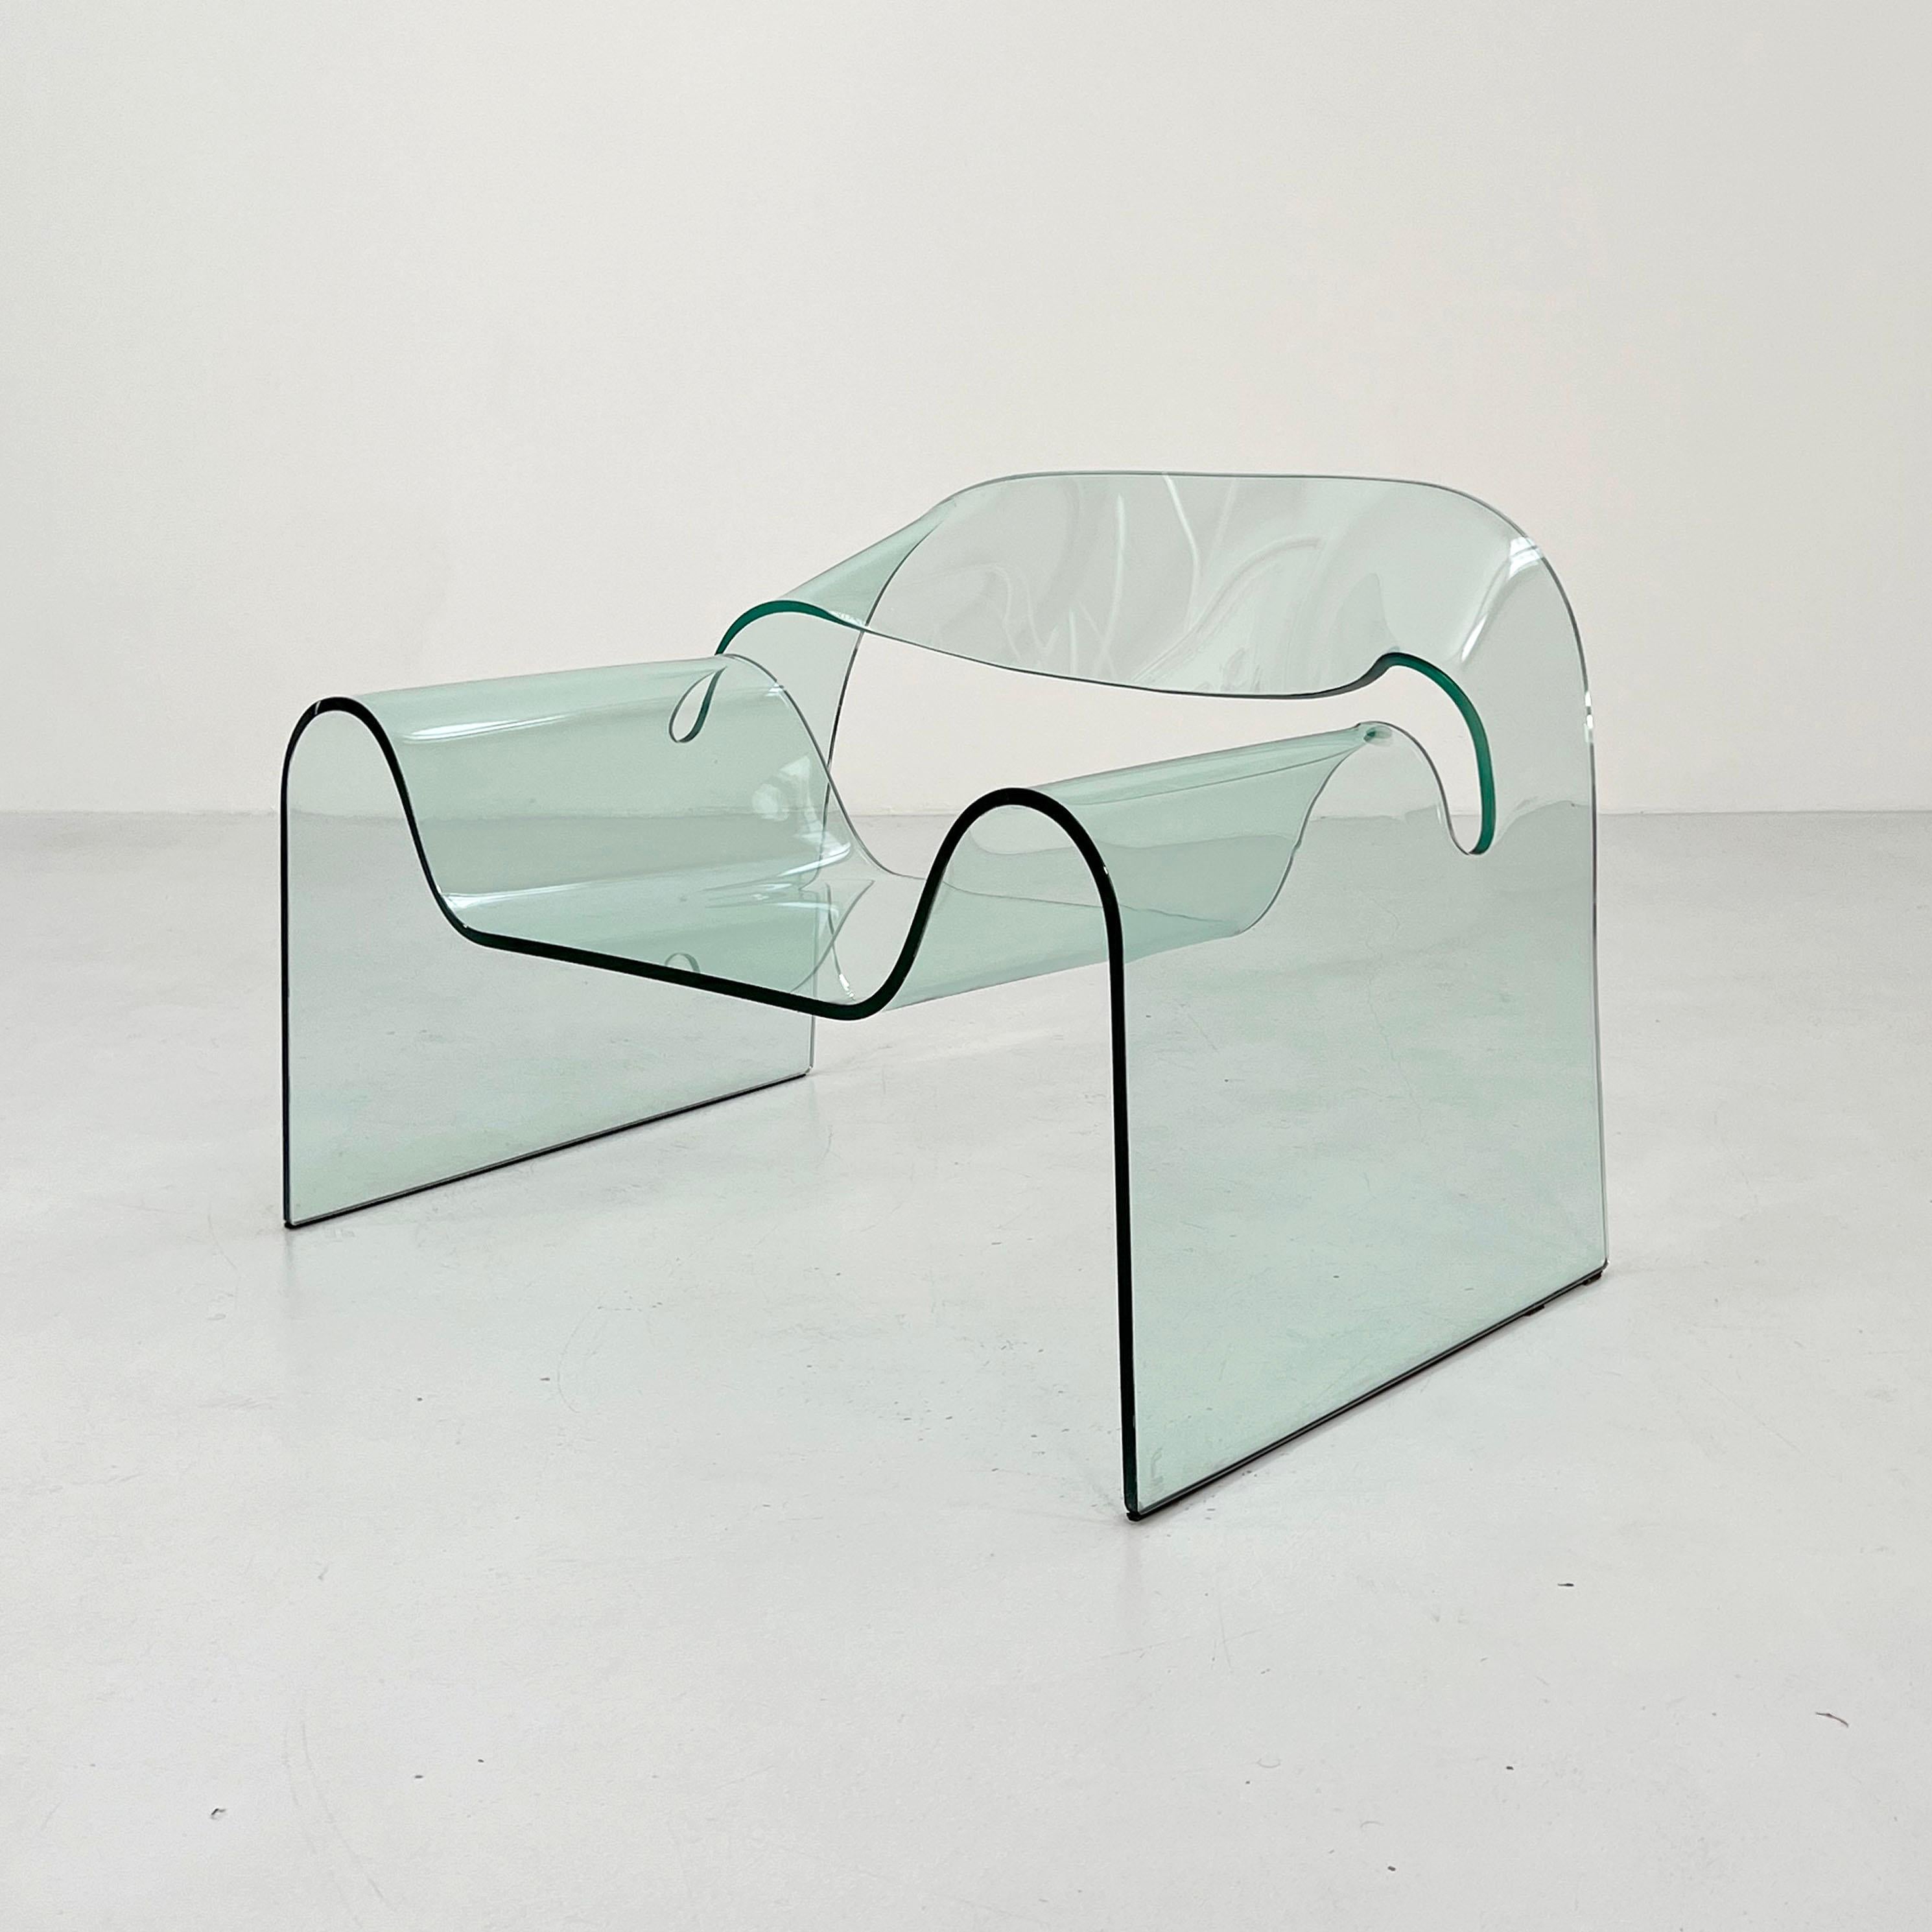 Designer - Cini Boeri
Producer - Fiam 
Model - Ghost Chair
Design Period - Nineties
Measurements - width 94 cm x depth 74 cm x height 62 cm x seat height 31 cm
Materials - glass
Color - clear
Light wear consistent with age and use.